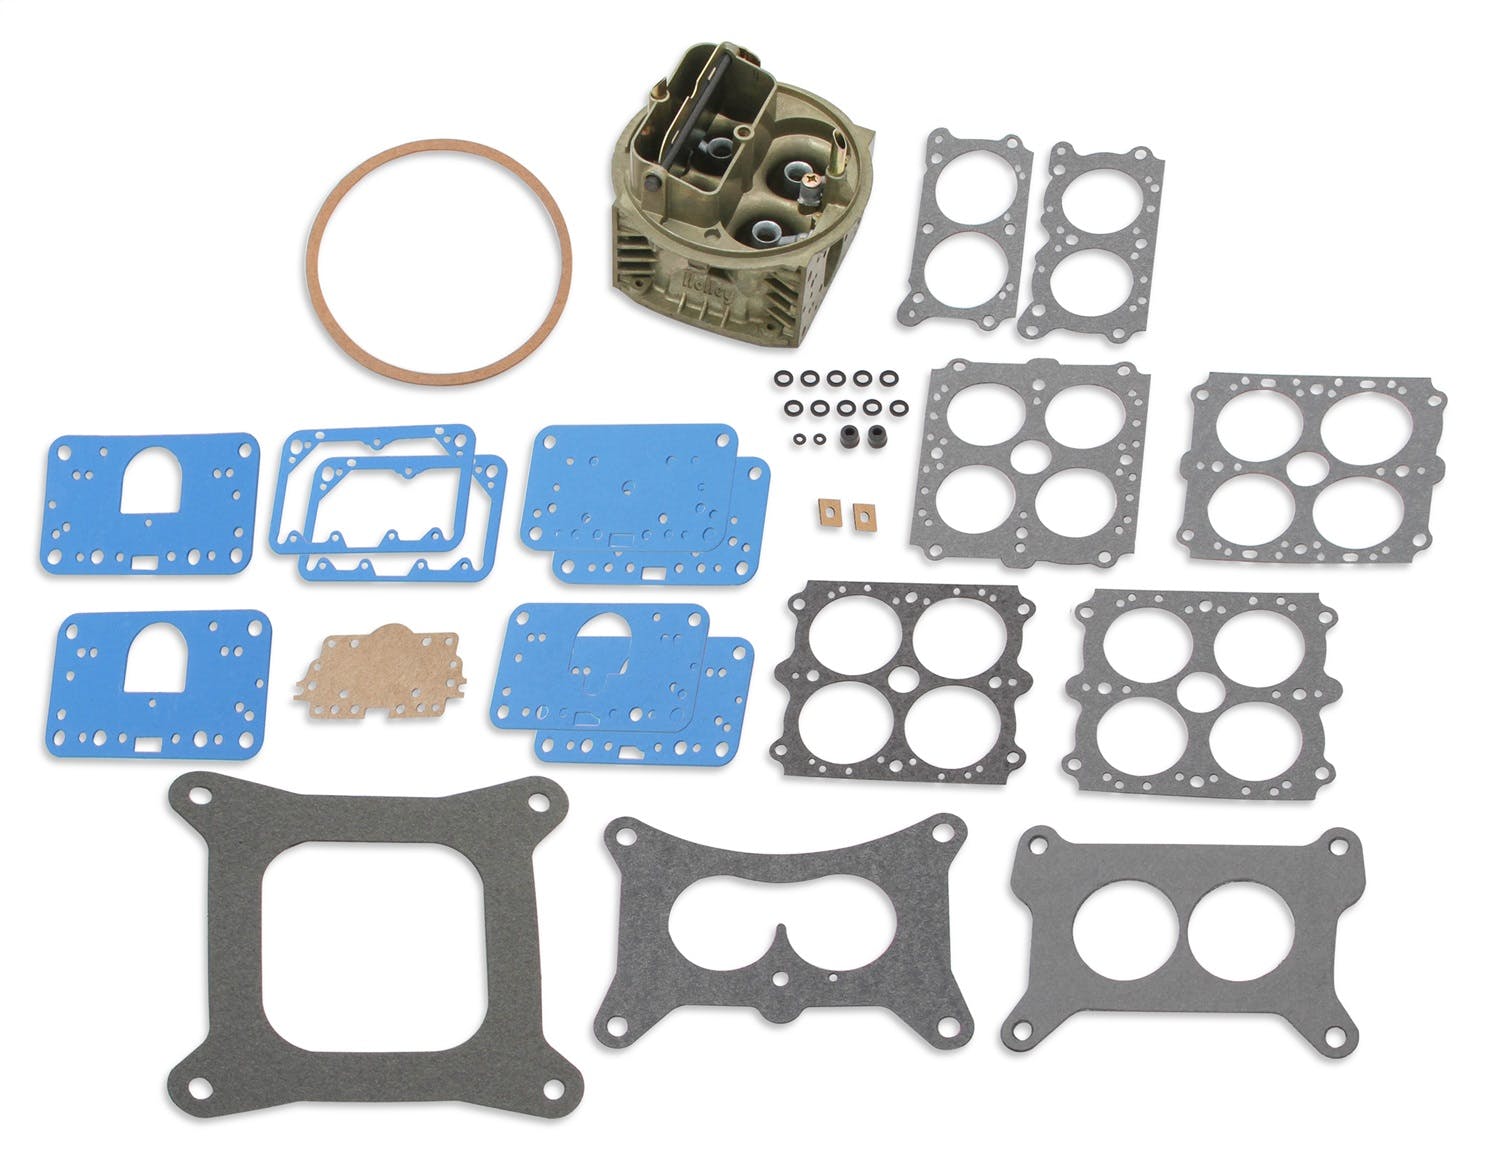 Holley 134-338 REPLACEMENT MAIN BODY KIT FOR 0-4779C